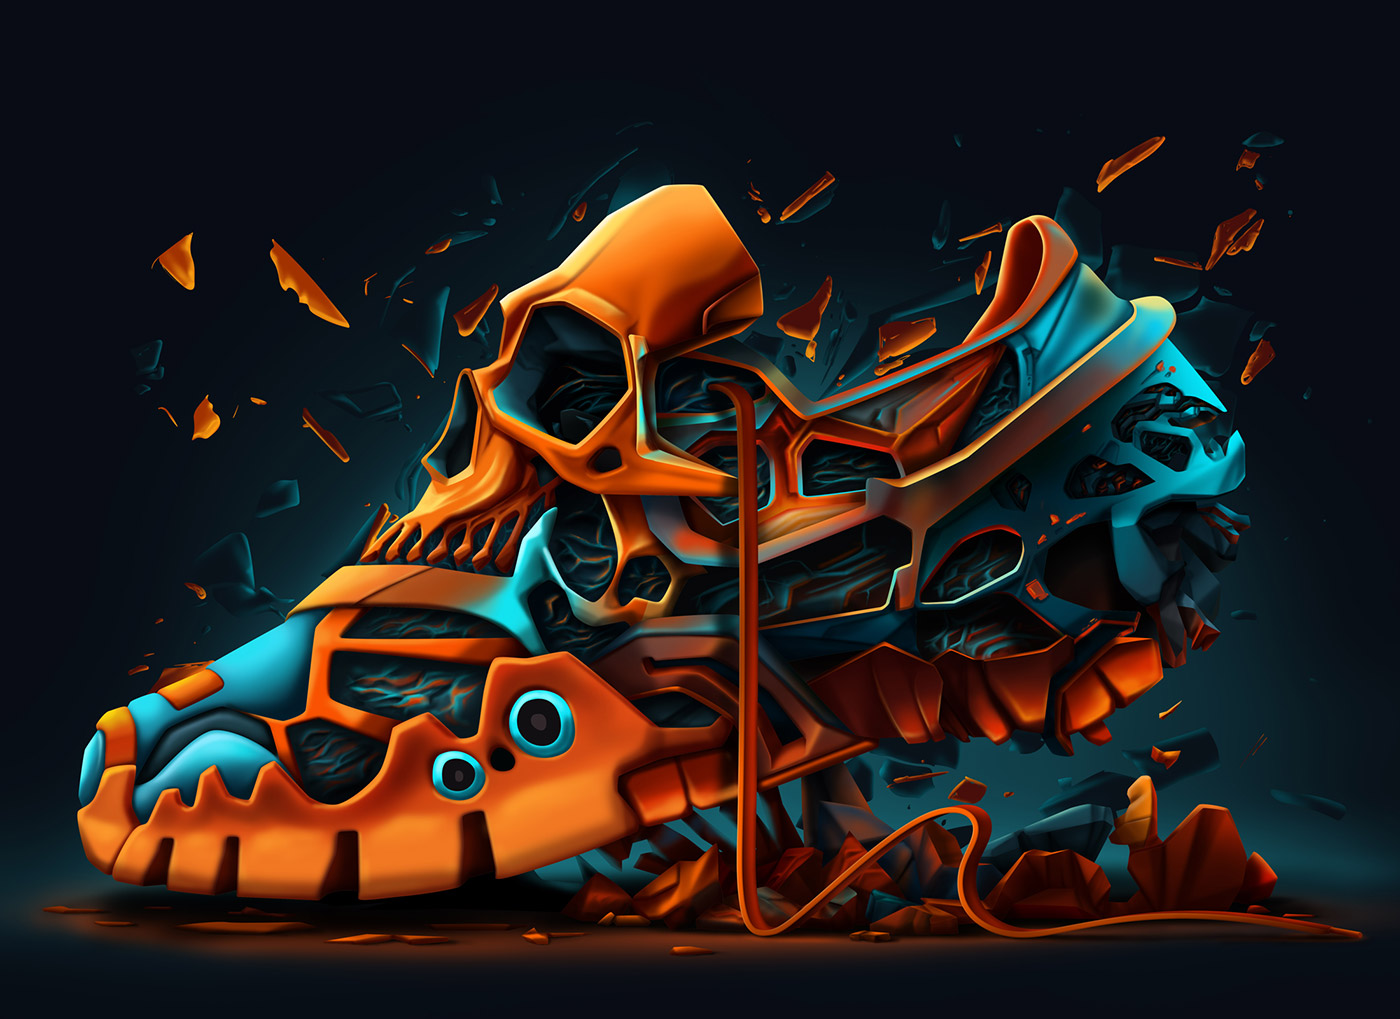 Illustration of abstract sneakers by Marcelo Schultz